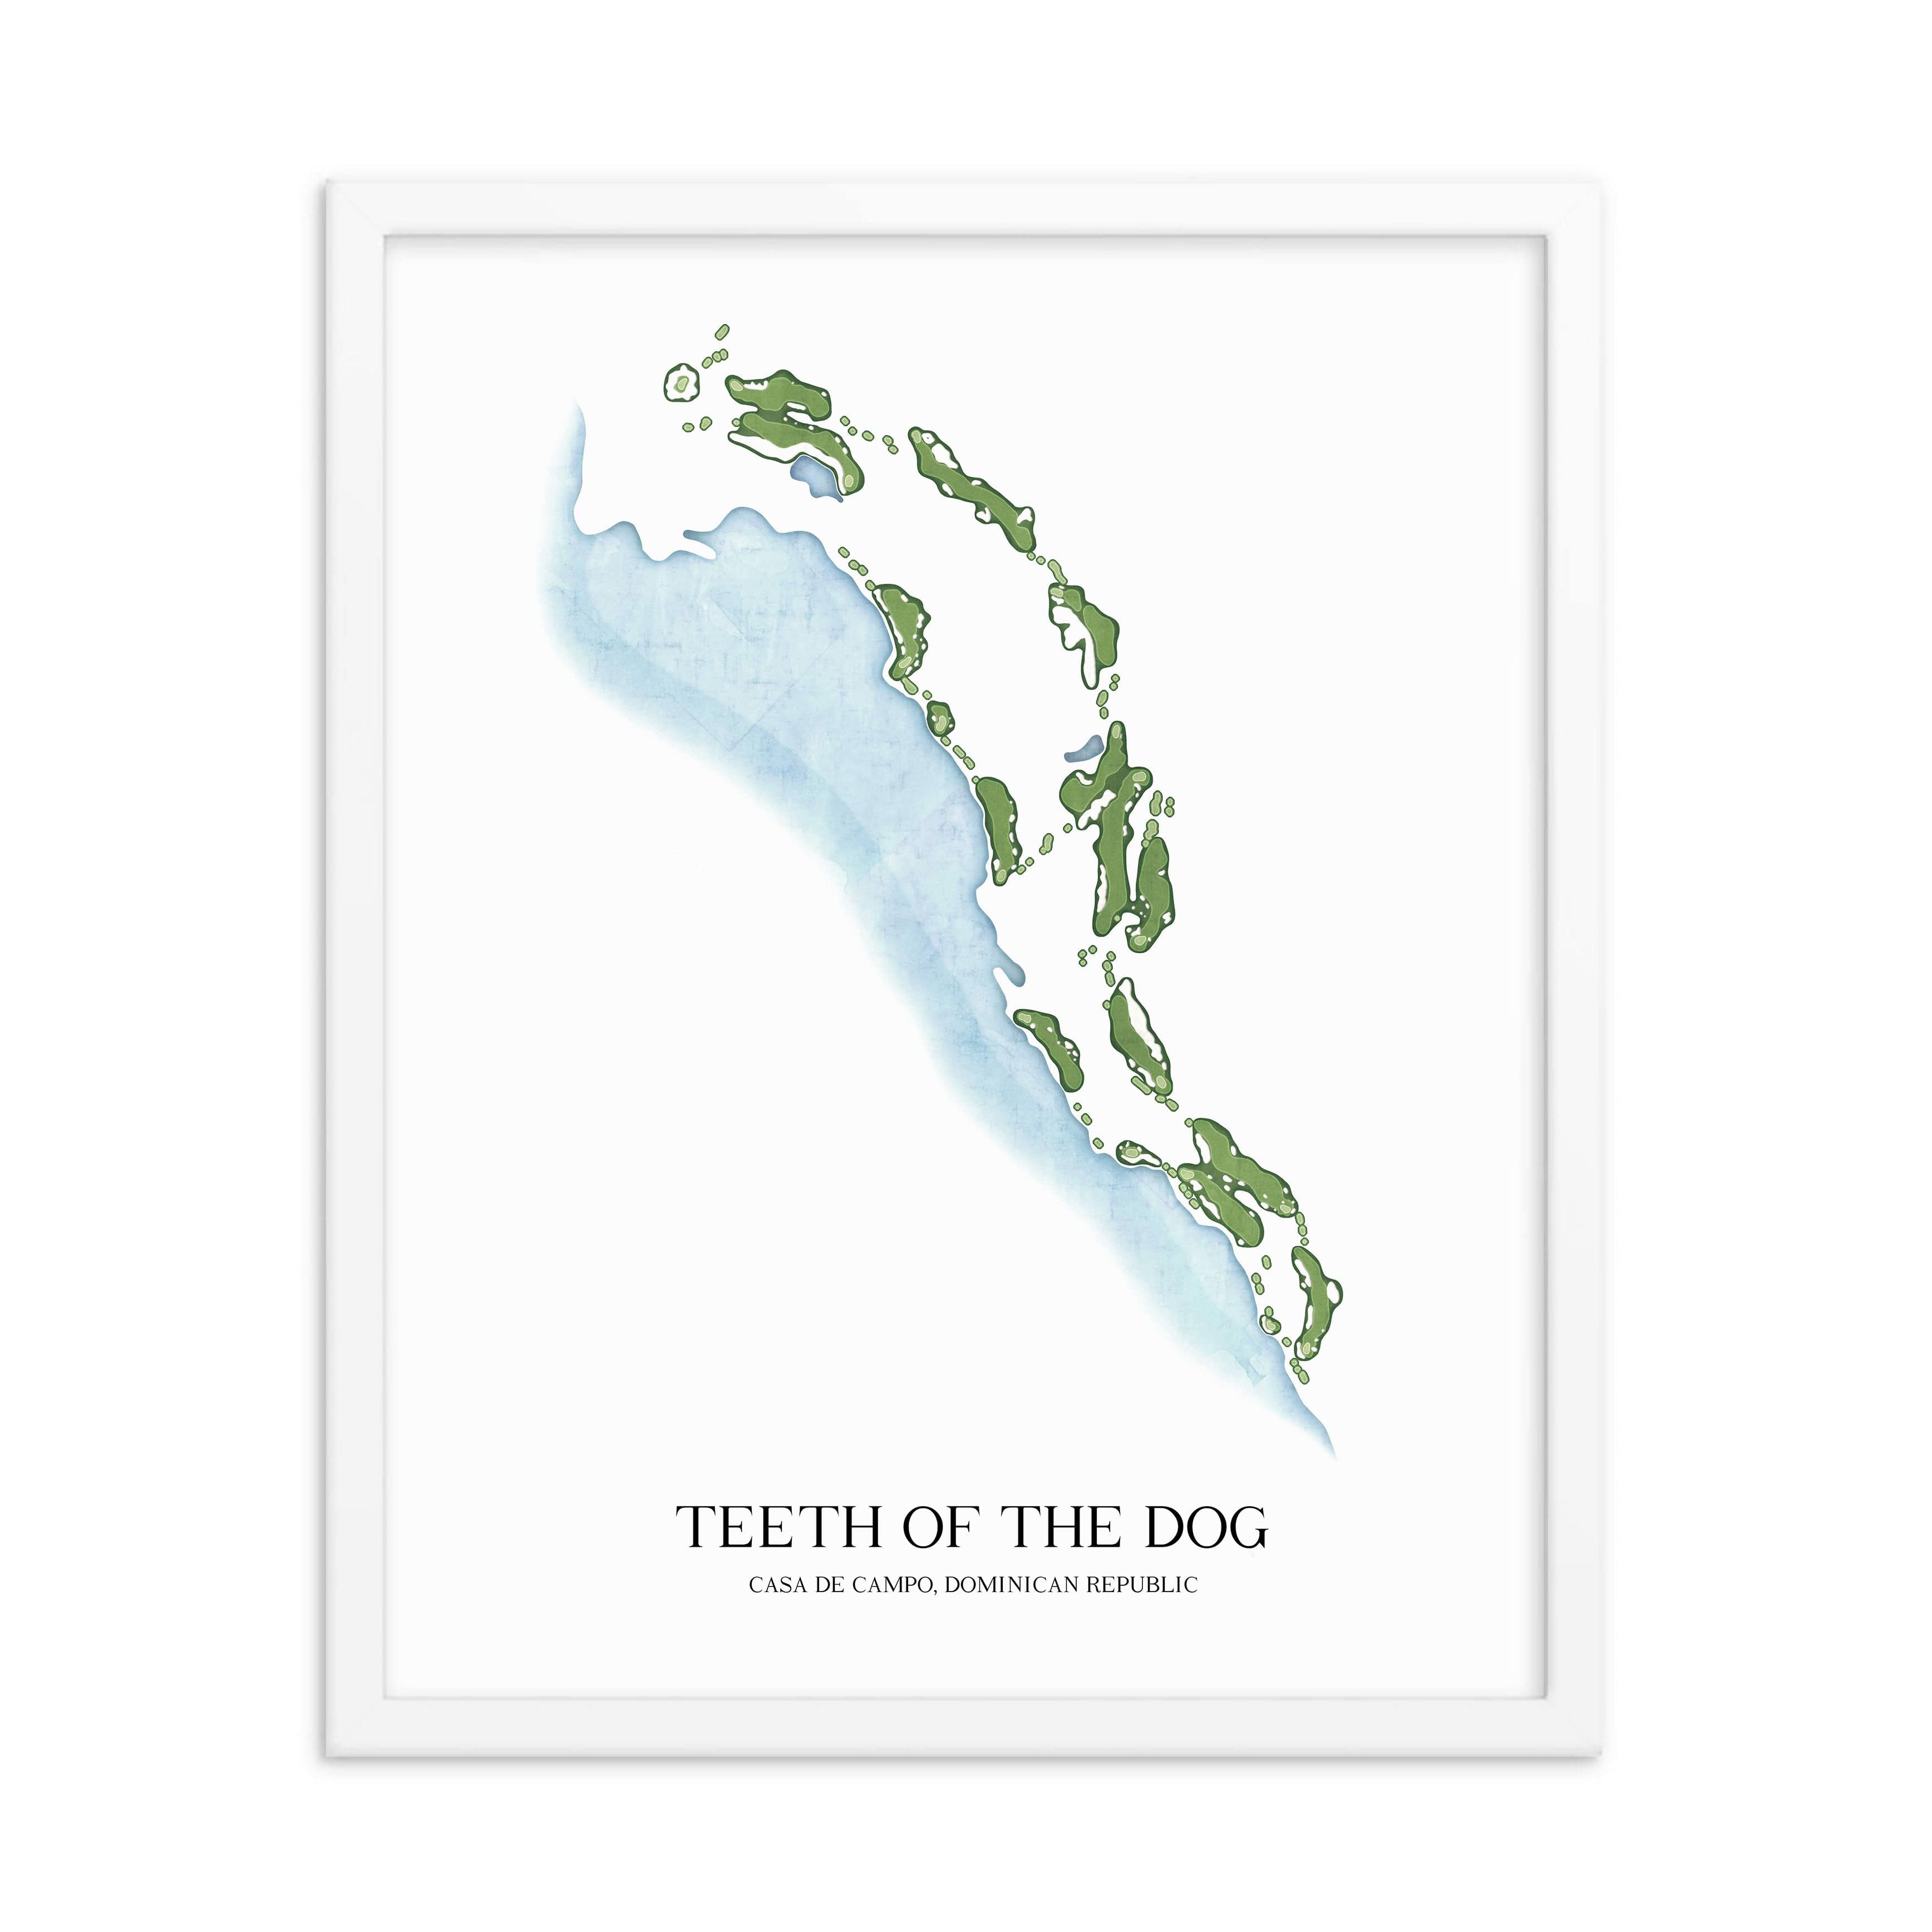 The 19th Hole Golf Shop - Golf Course Prints -  Teeth of the Dog Golf Course Map